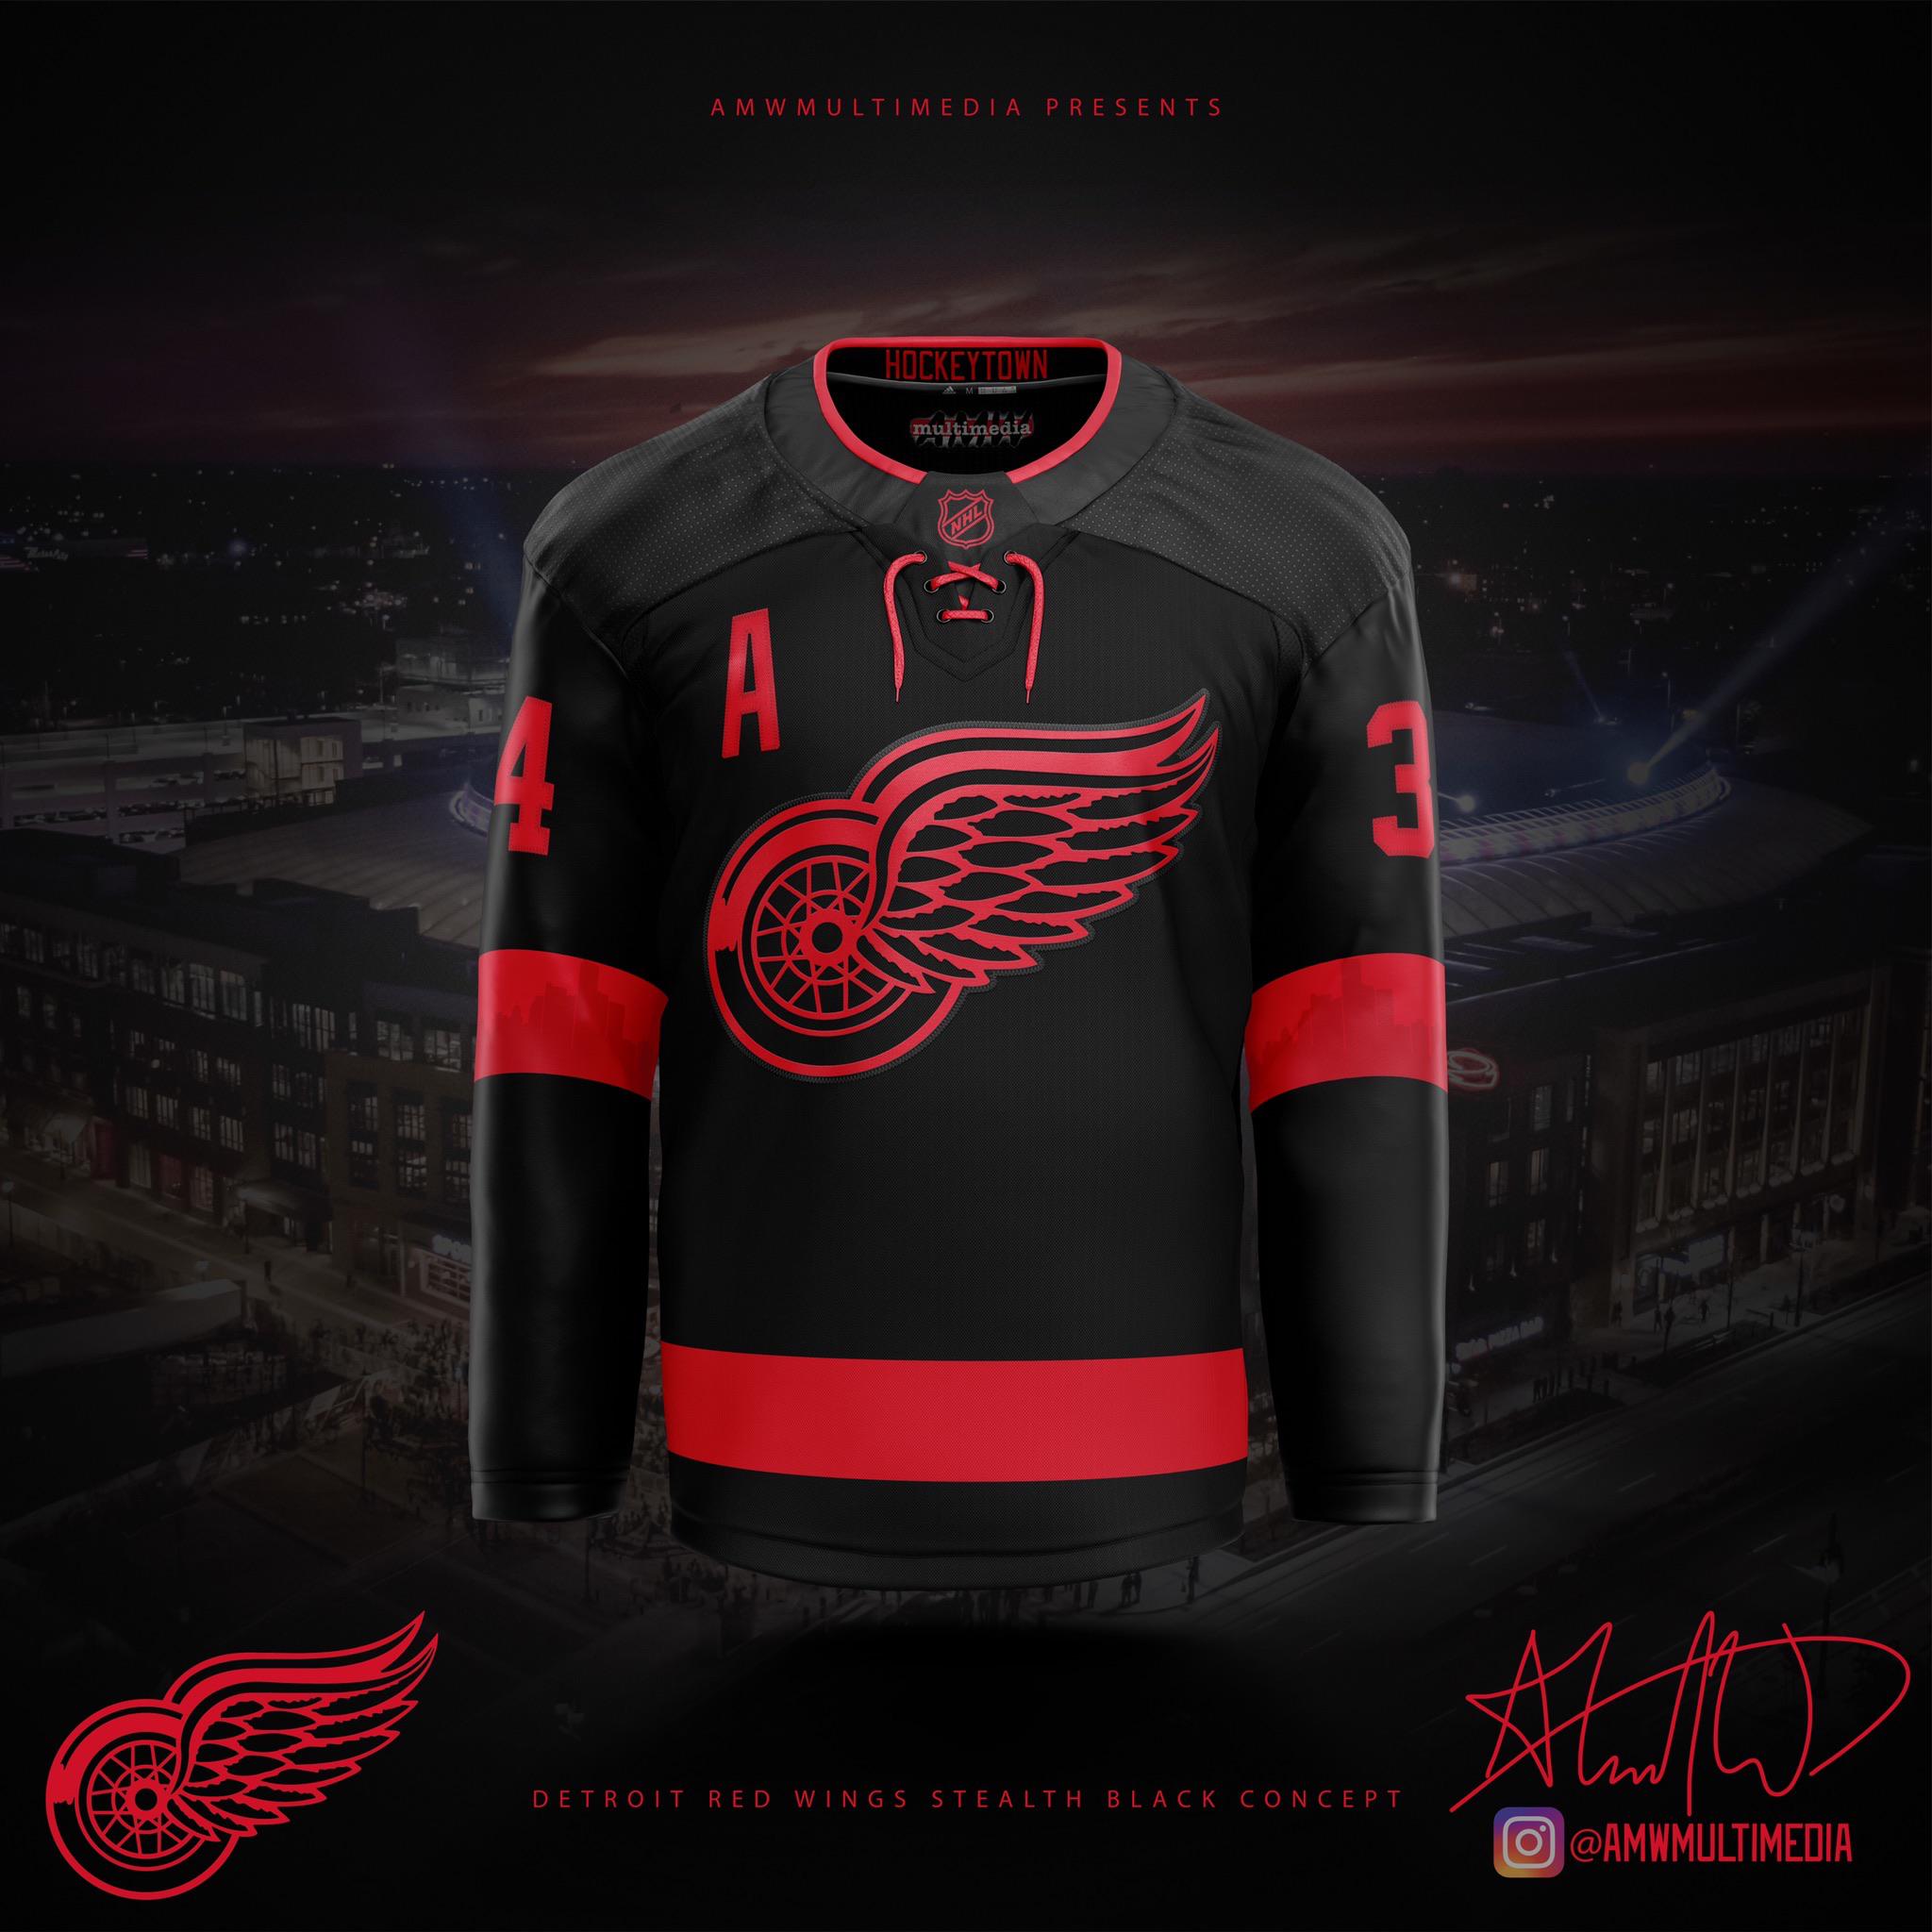 Detroit Red Wings 'Stealth Black' concept jersey is getting mixed